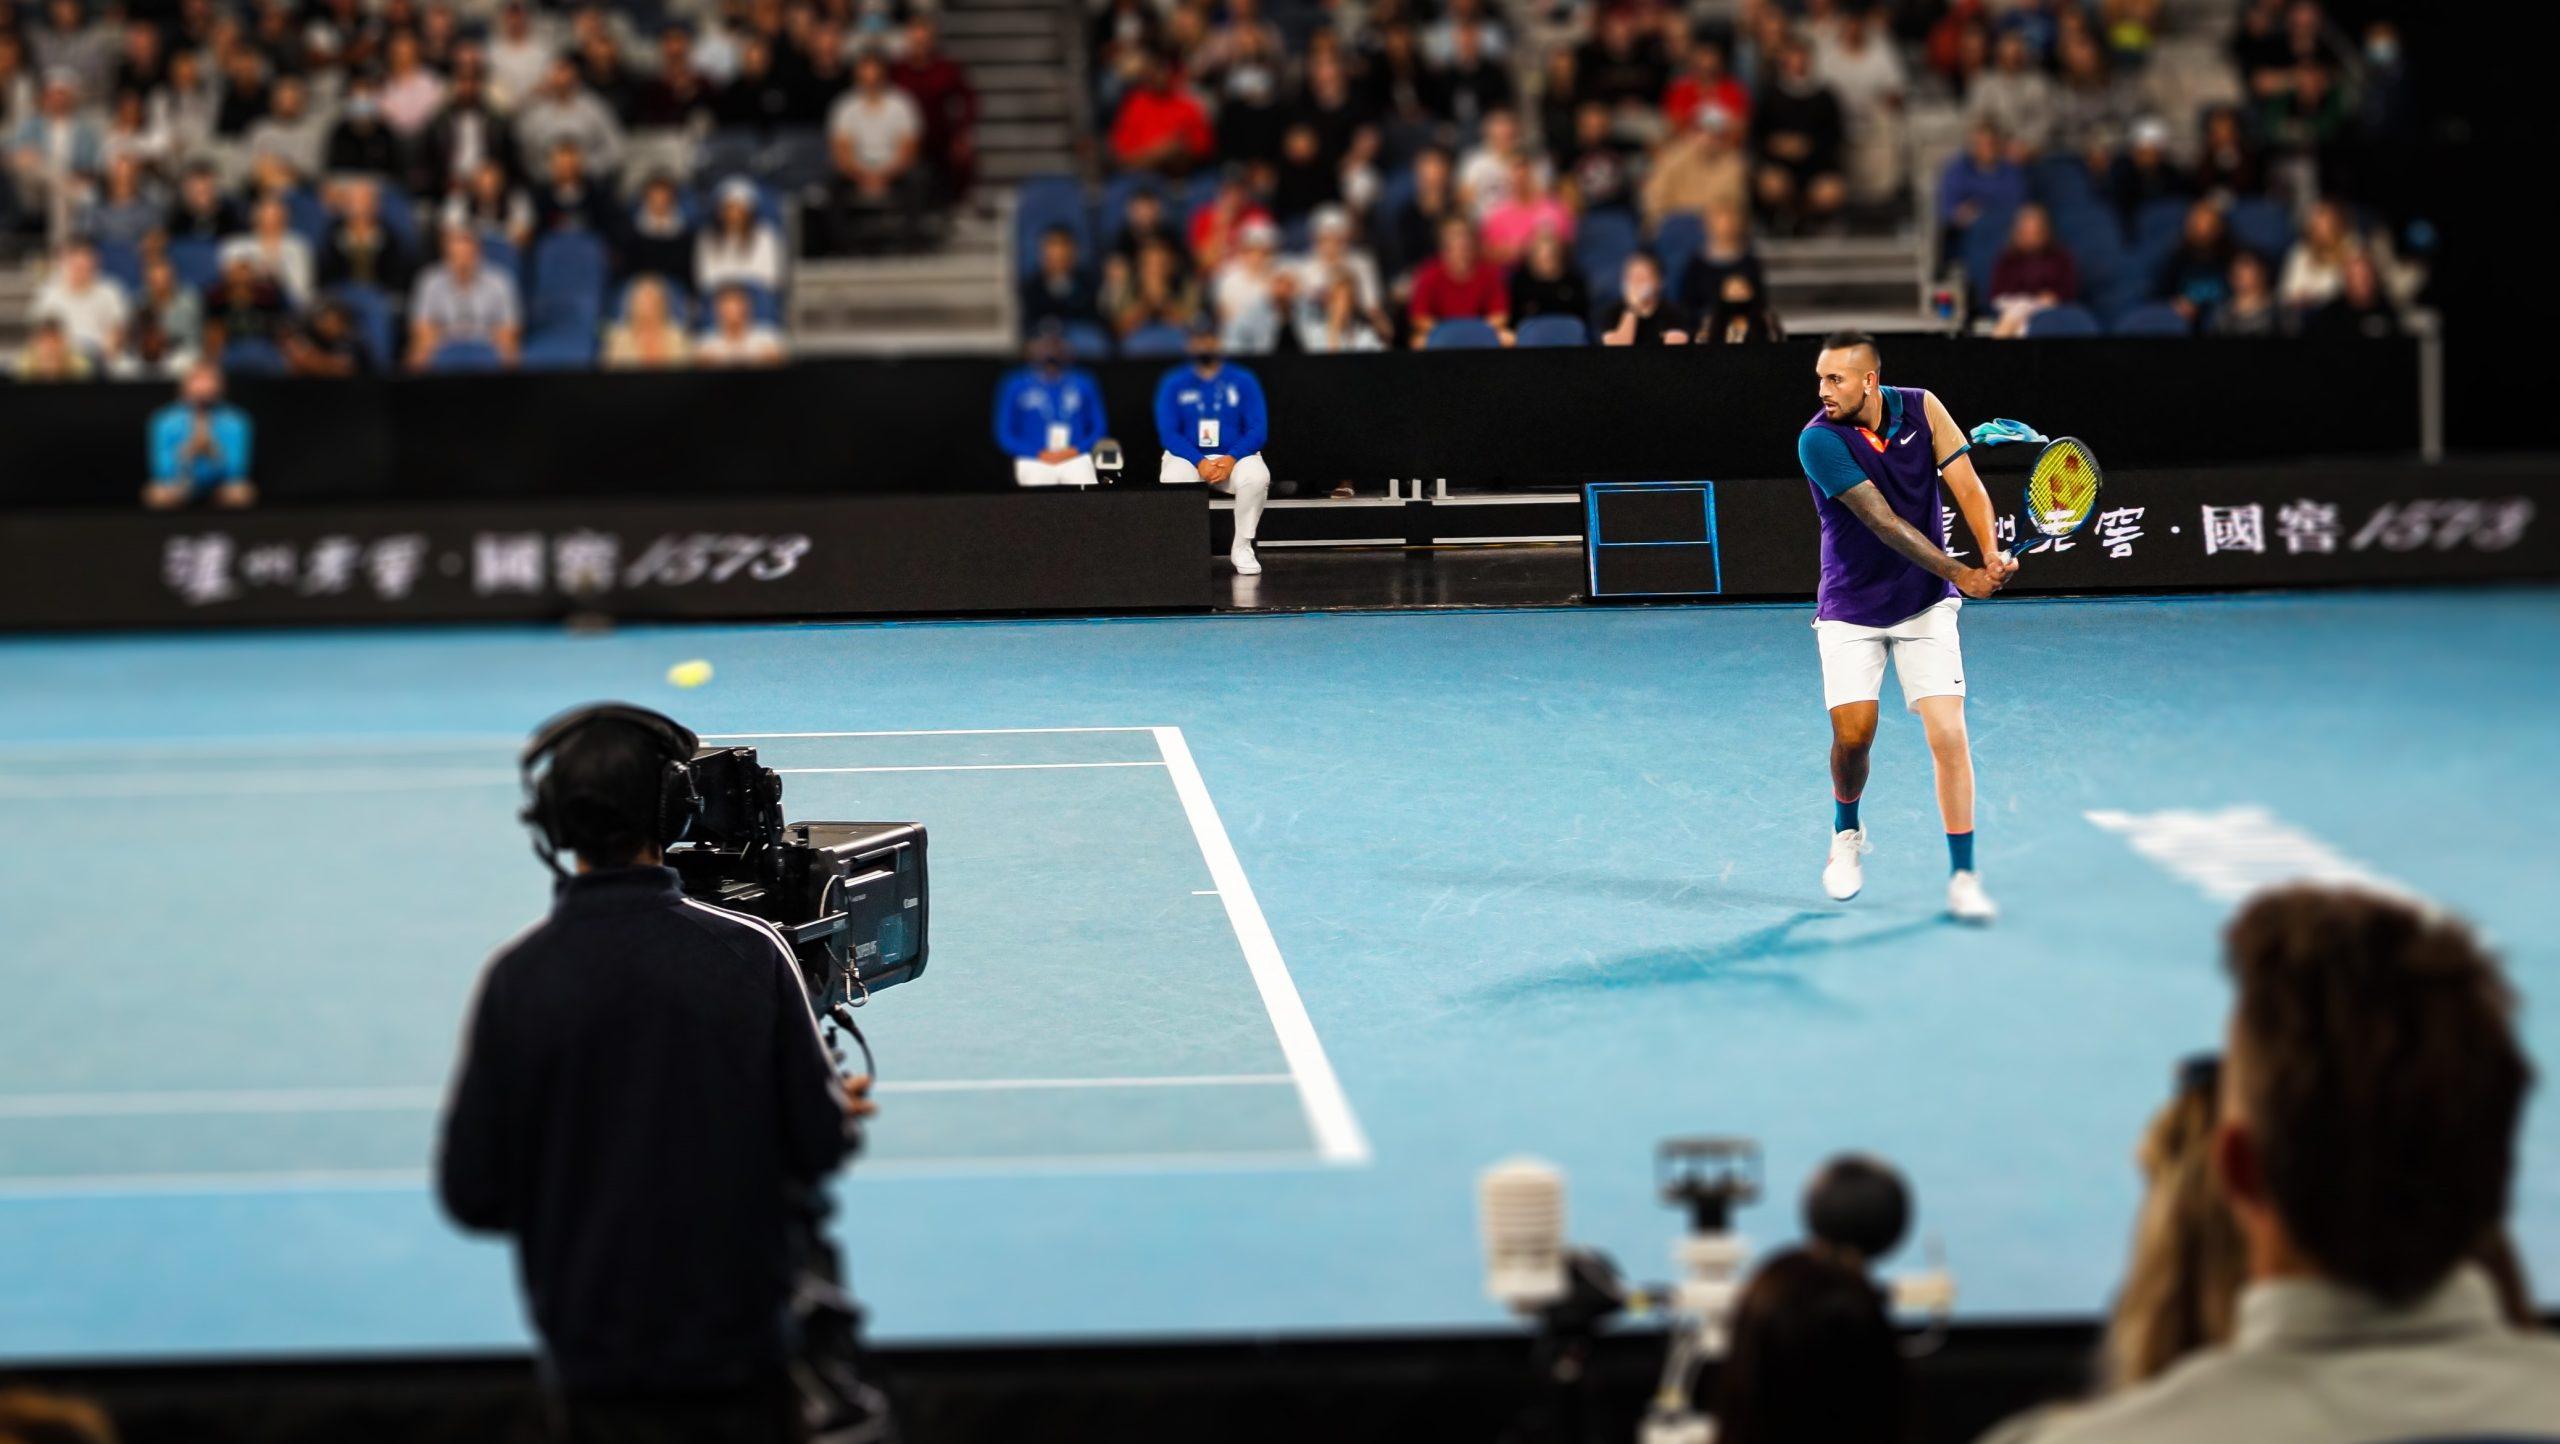 Nick Kyrgios returning a shot from Dominic Thiem in the third round of the 2021 Australian Open.